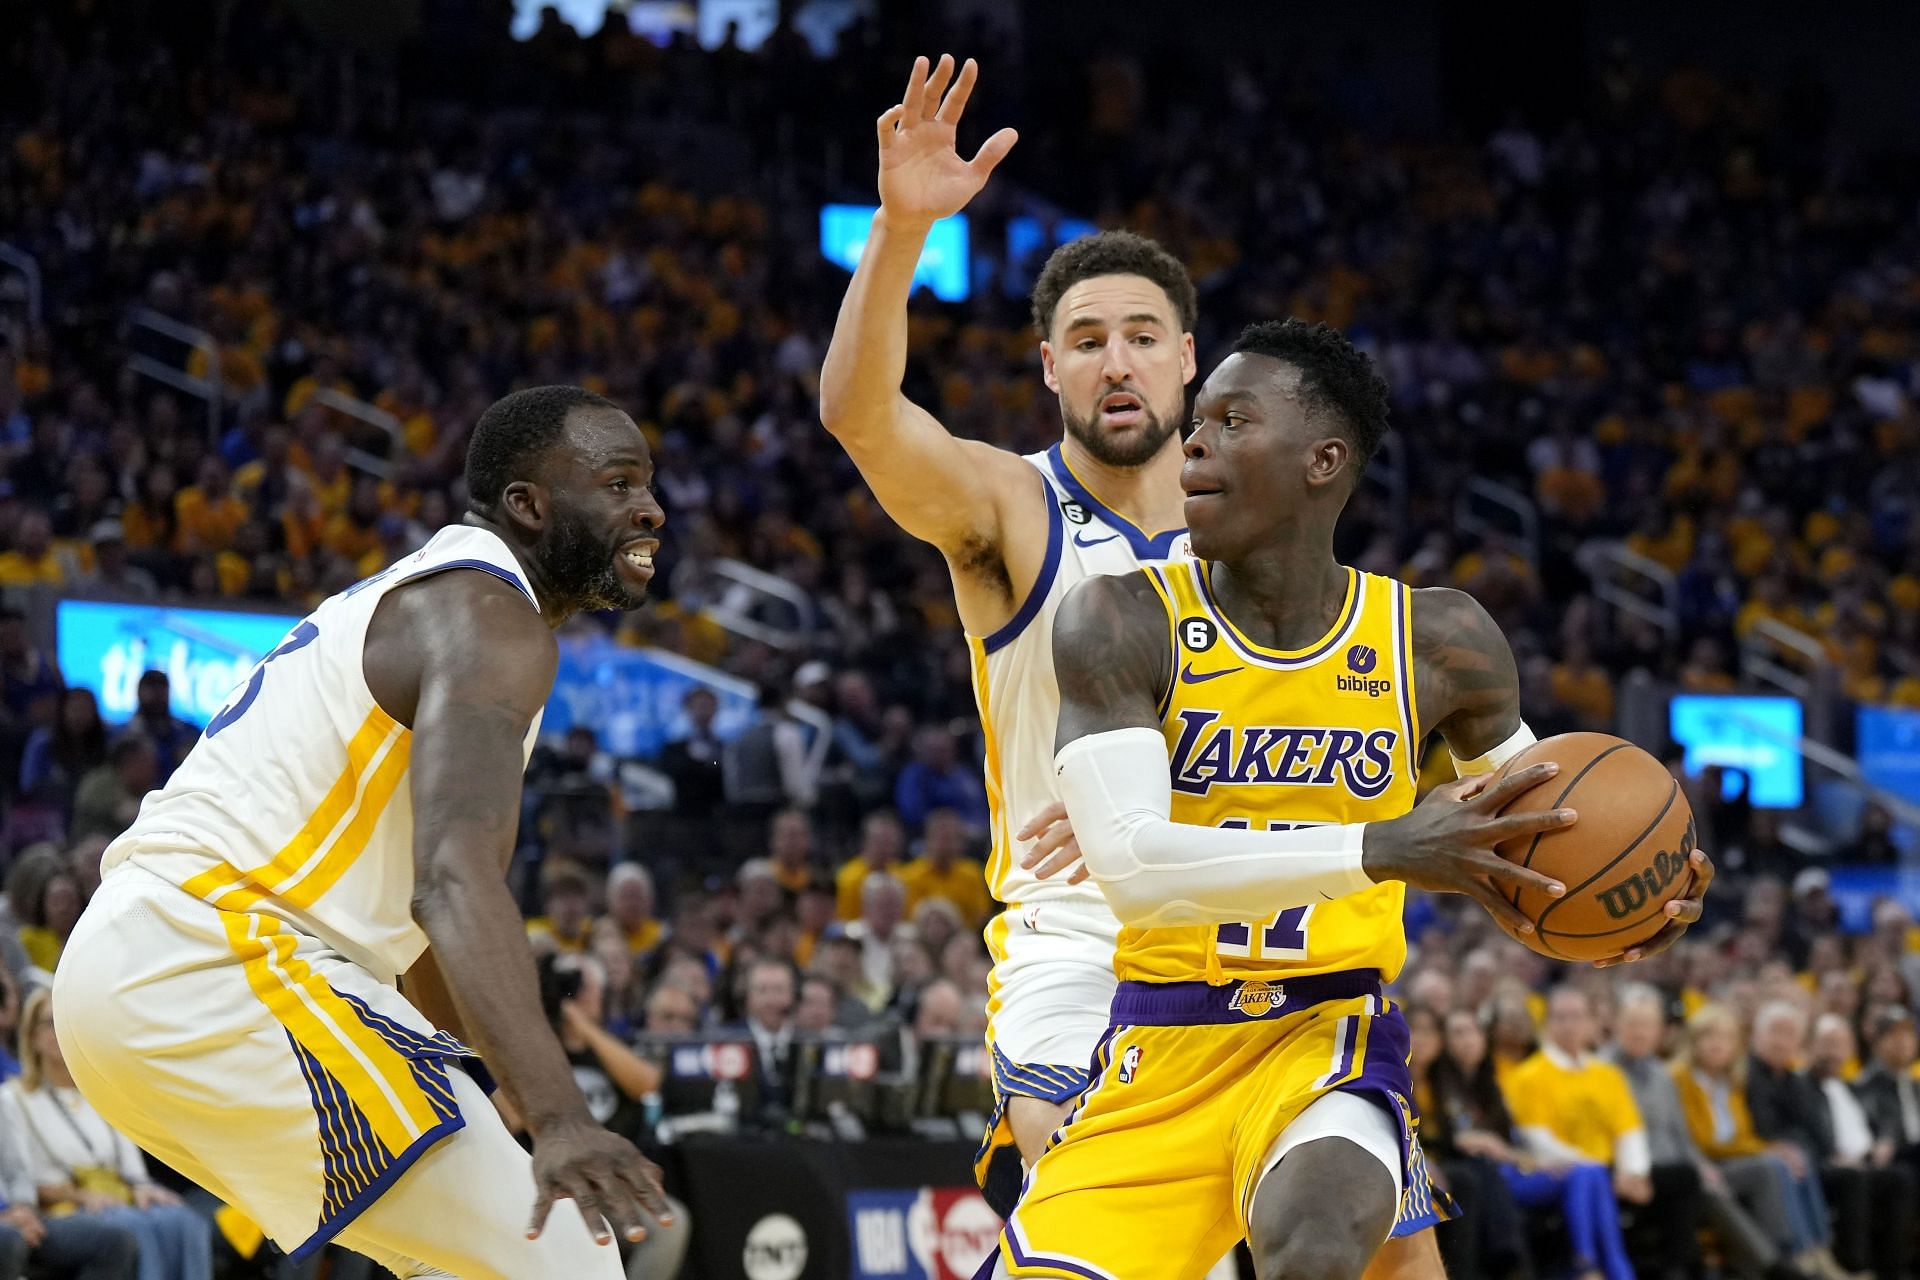 Warriors' JaMychal Green Says LeBron James' Comments About the Lakers Not  Flopping Are 'Cap